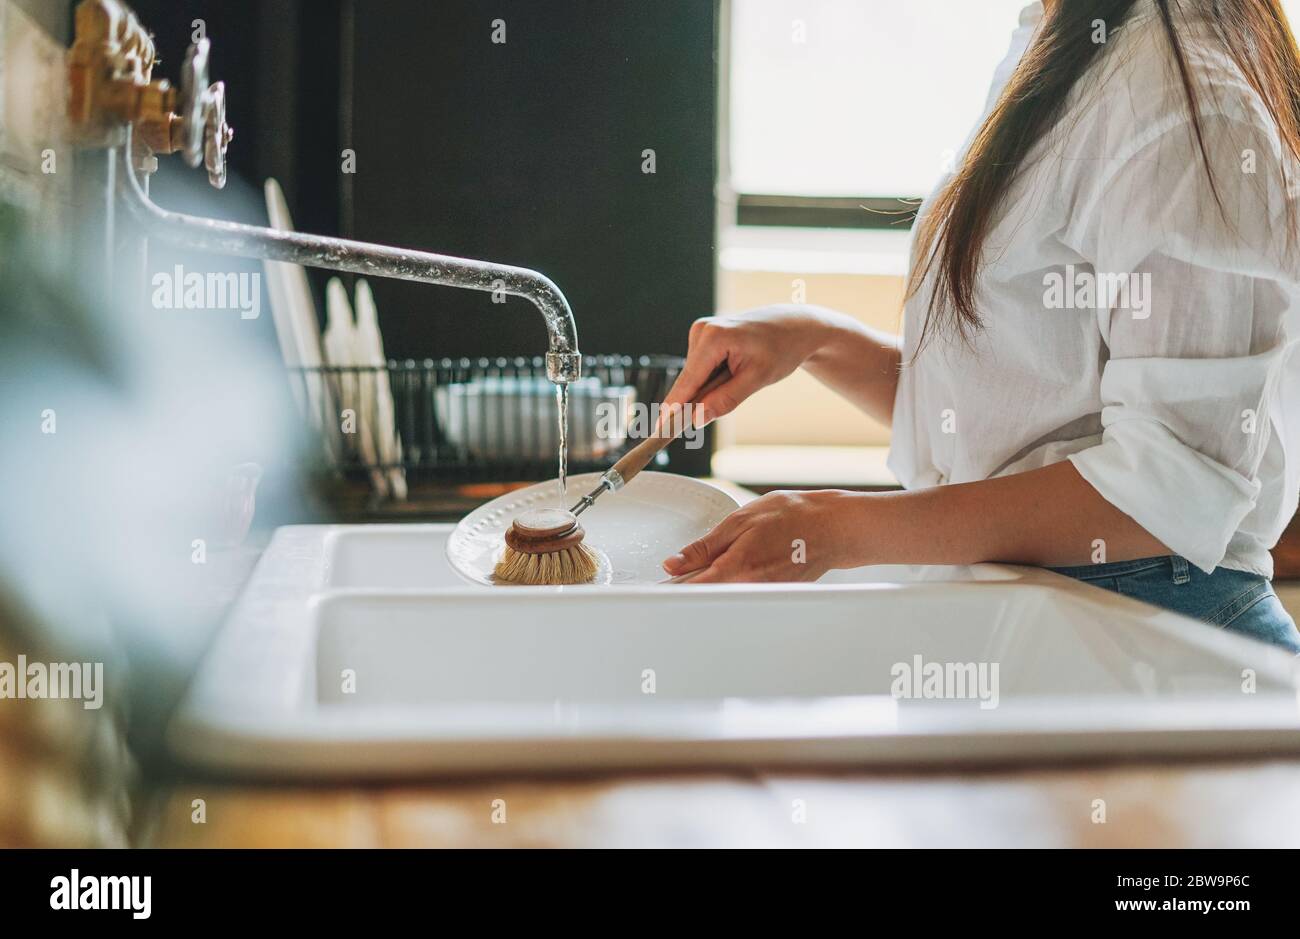 Young woman washes dishes with wooden brush with natural bristles at window in kitchen. Zero waste concept Stock Photo